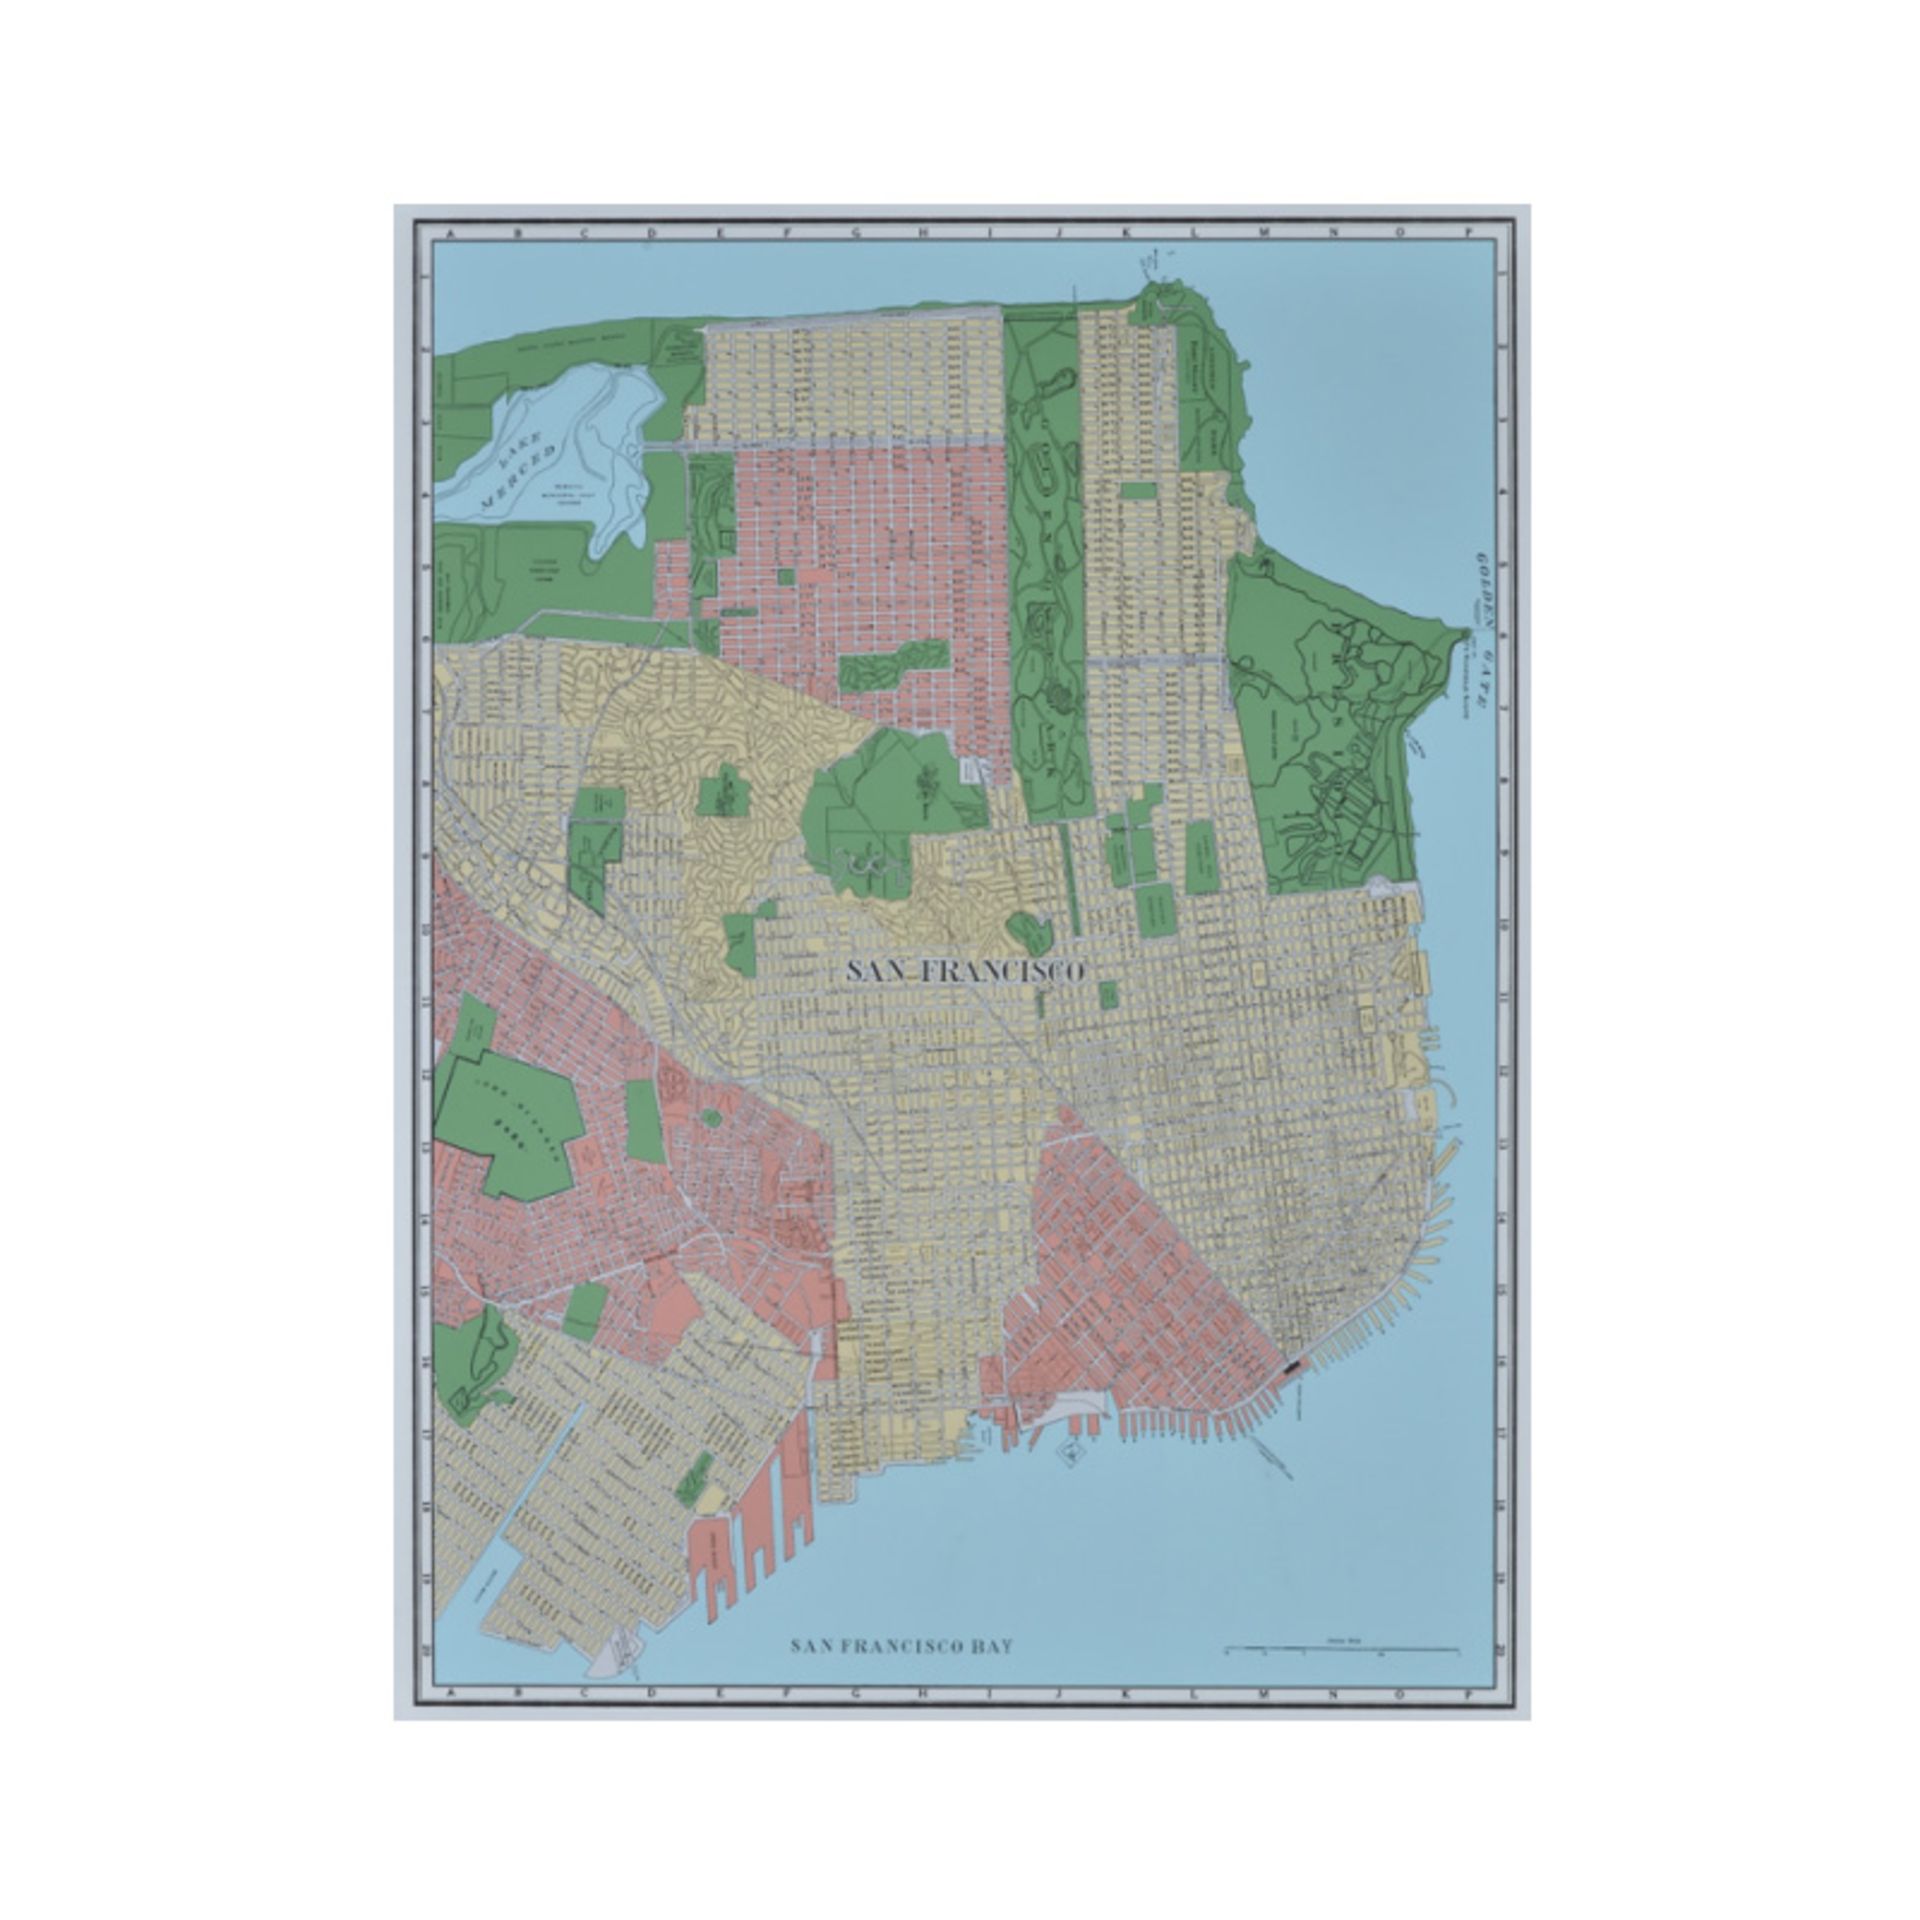 Capital Map San Francisco These Unframed City Maps Pay Homage To Each City's History And The Life - Image 2 of 2